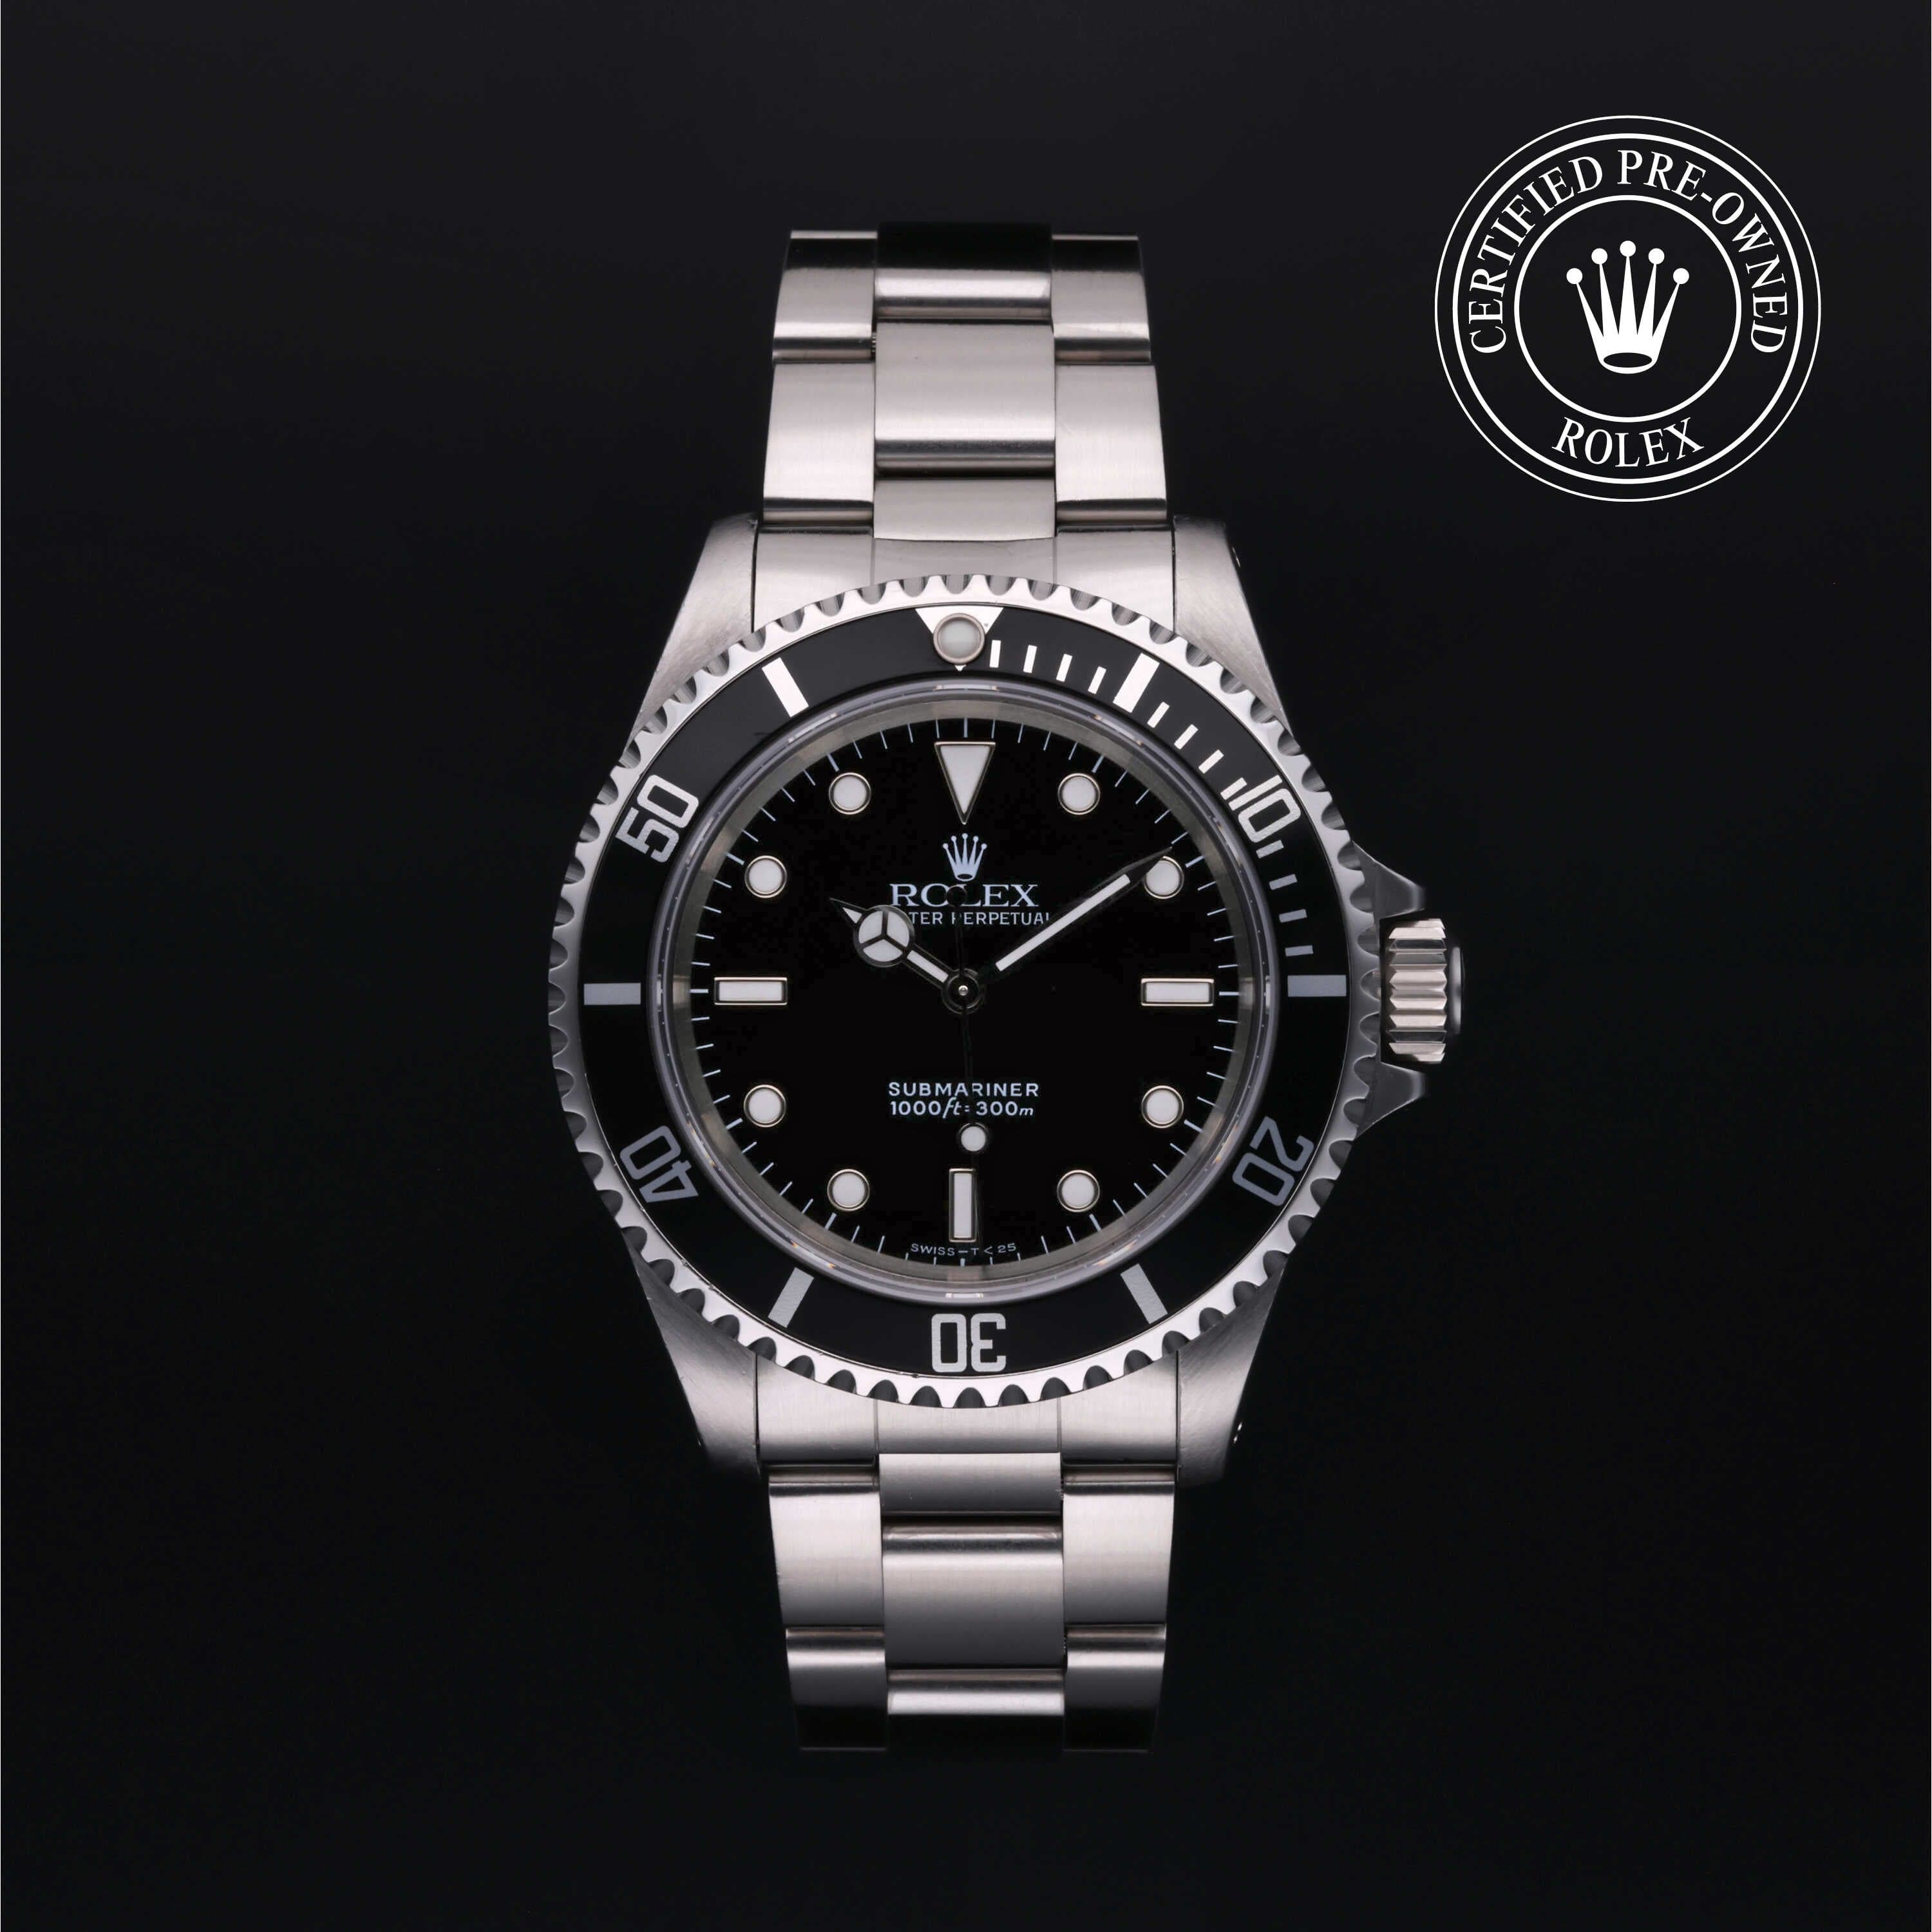 Rolex Certified Pre-Owned Submariner in Oyster, 40 mm, Stainless Steel 14060 watch available at Long's Jewelers.